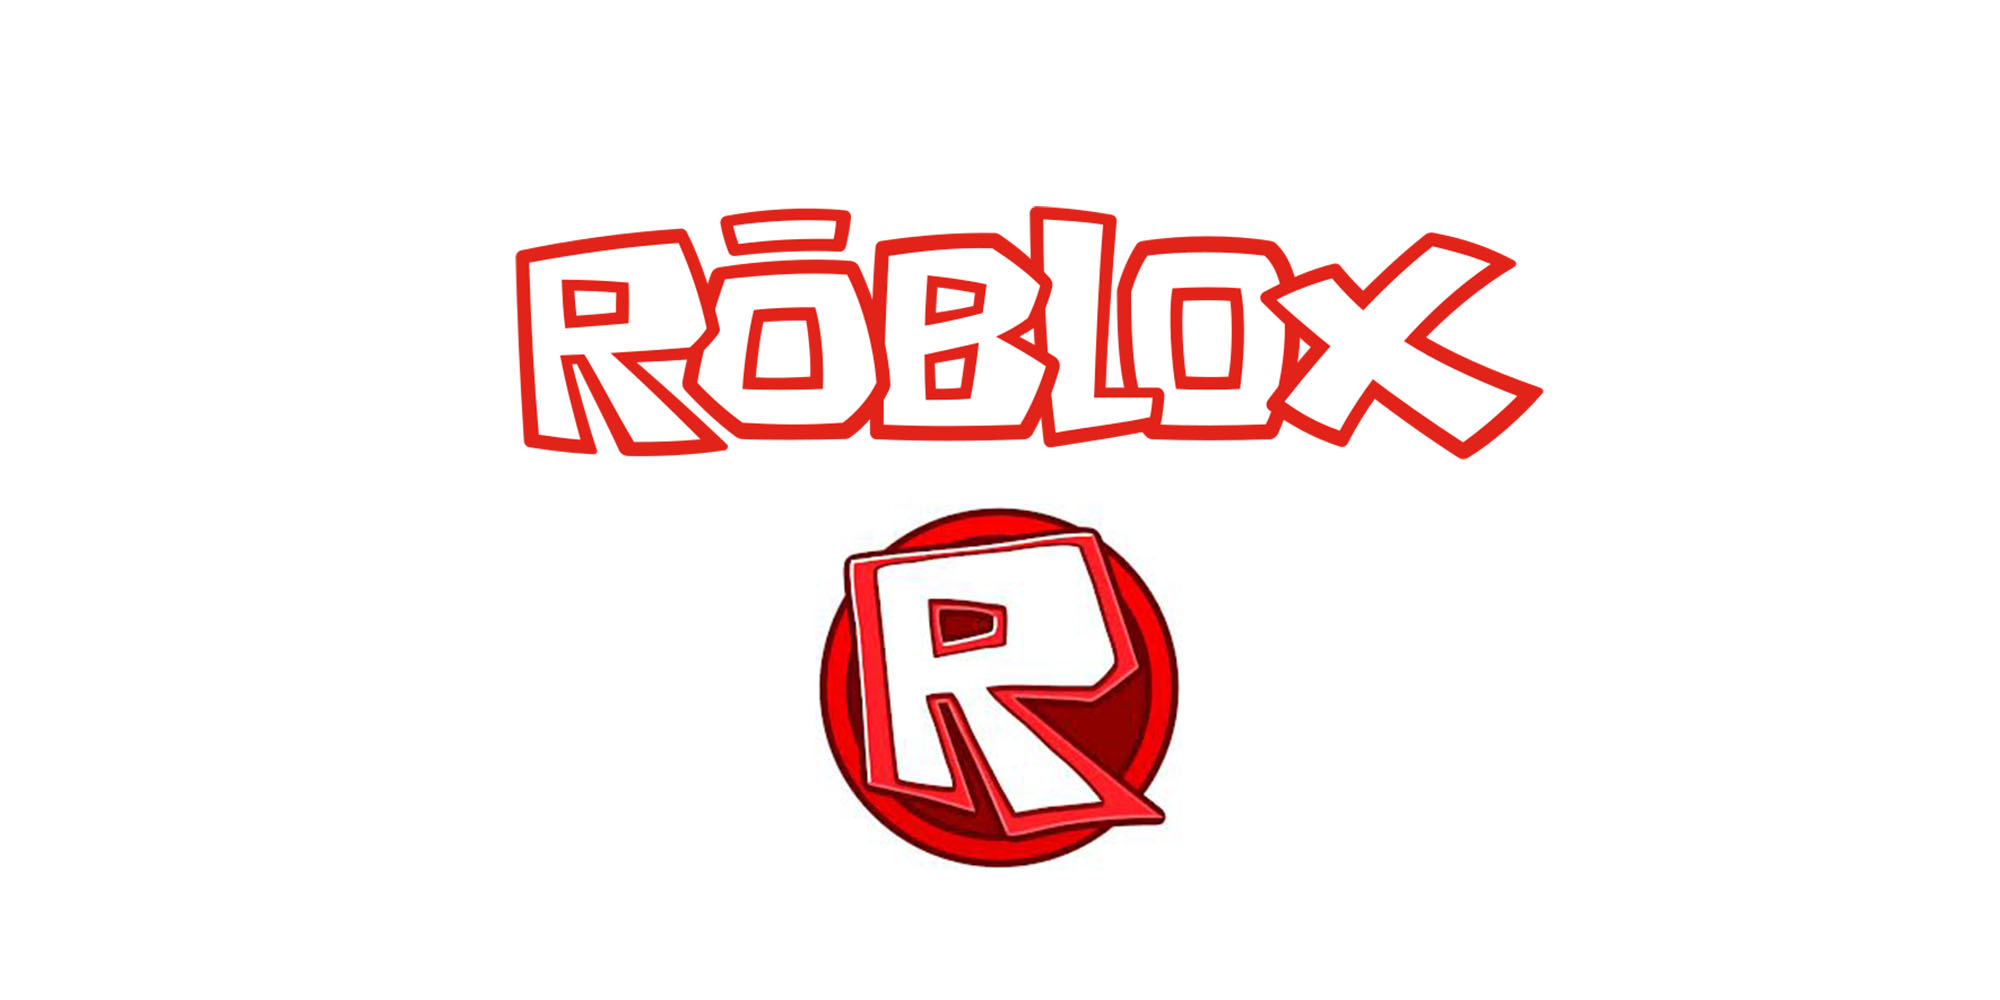 Roblox Draws More Than 50 Million Players A Month To Game - 